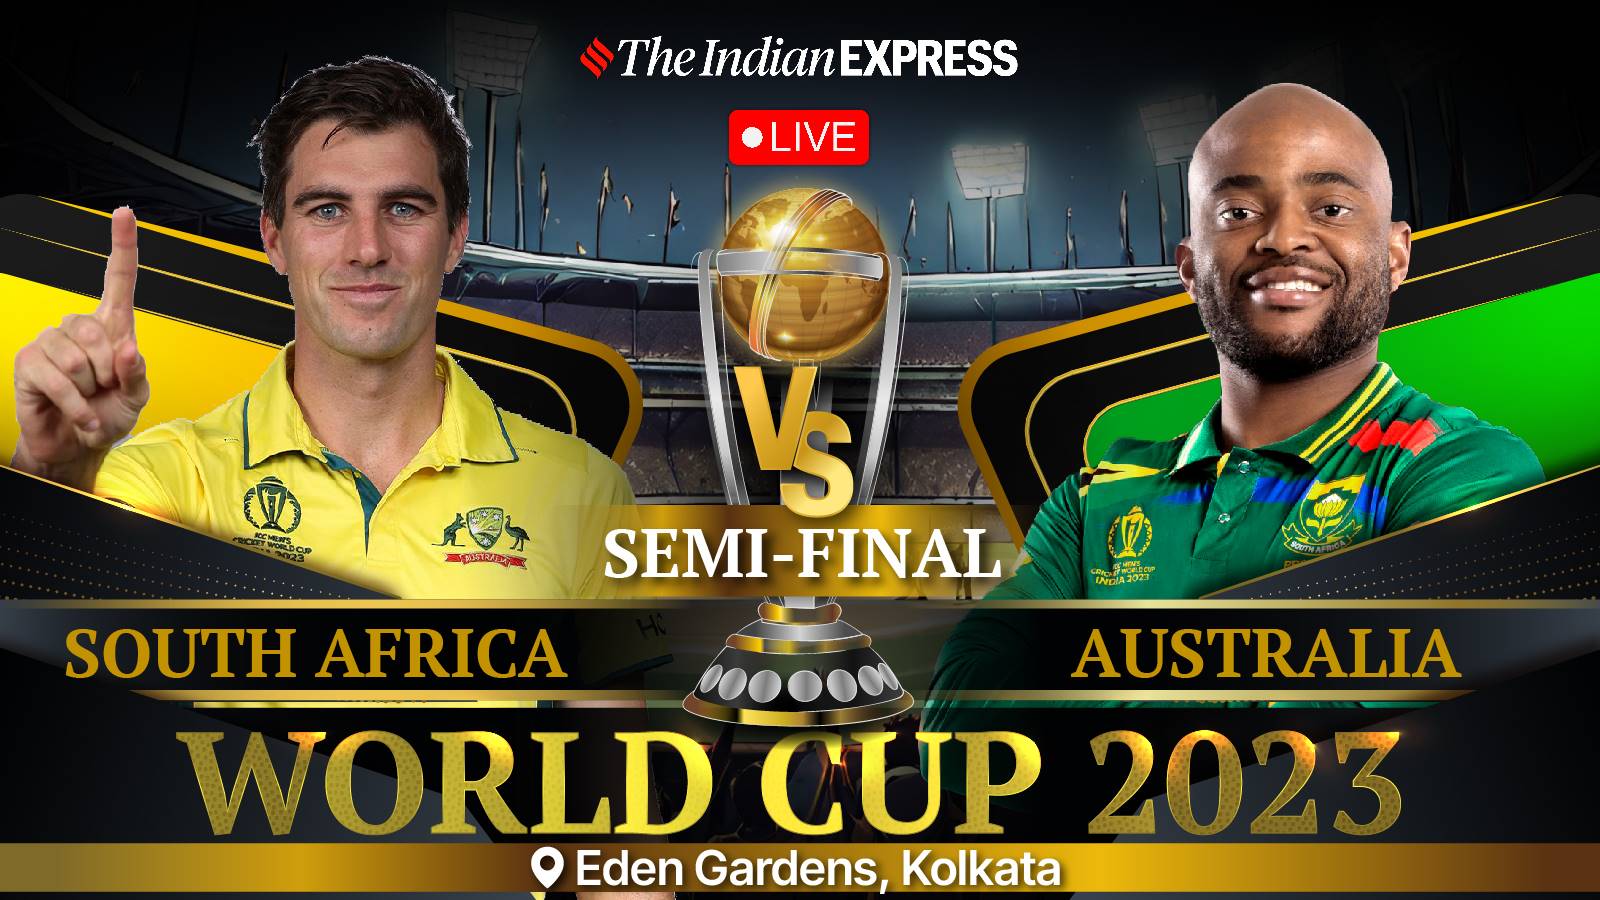 South Africa vs Australia Live Score, World Cup 2023 Semi-Final: Play to resume at 3:55 PM in Kolkata | Cricket News